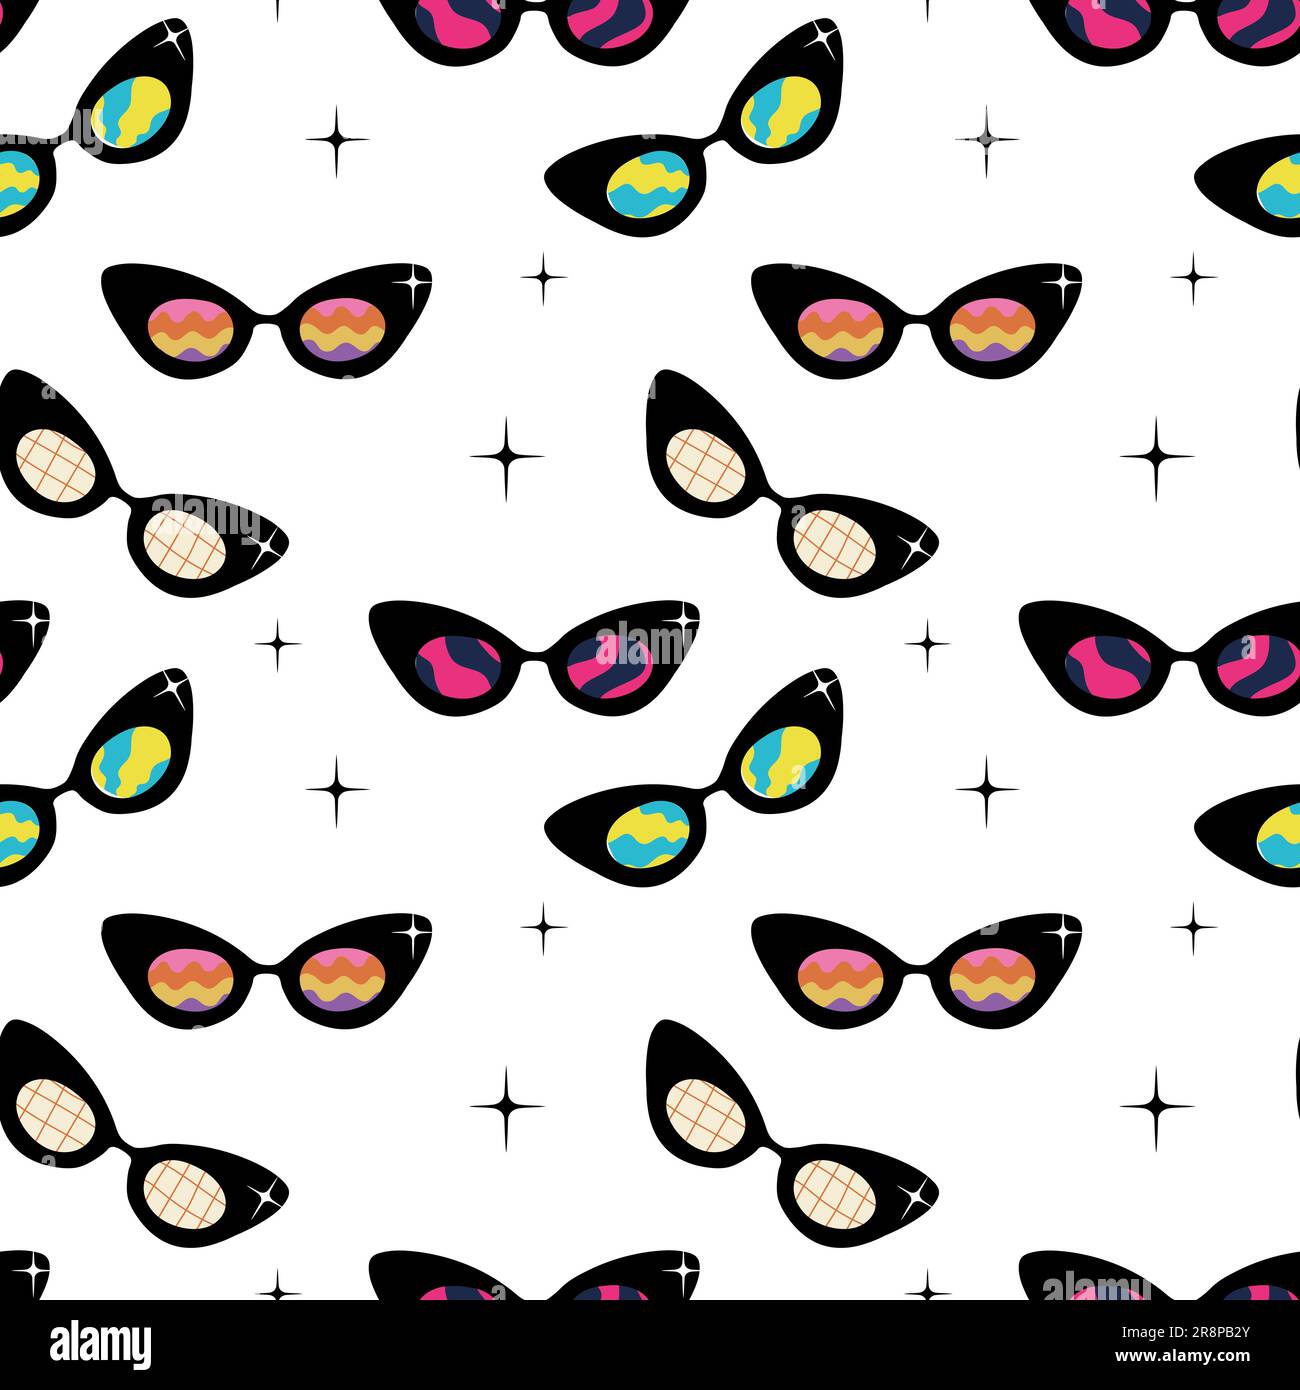 Seamless pattern with psychedelic sunglasses in style of 1970s. Cat form Retro groovy graphic elements of glasses with rainbow, lines and waves. Hippi Stock Vector